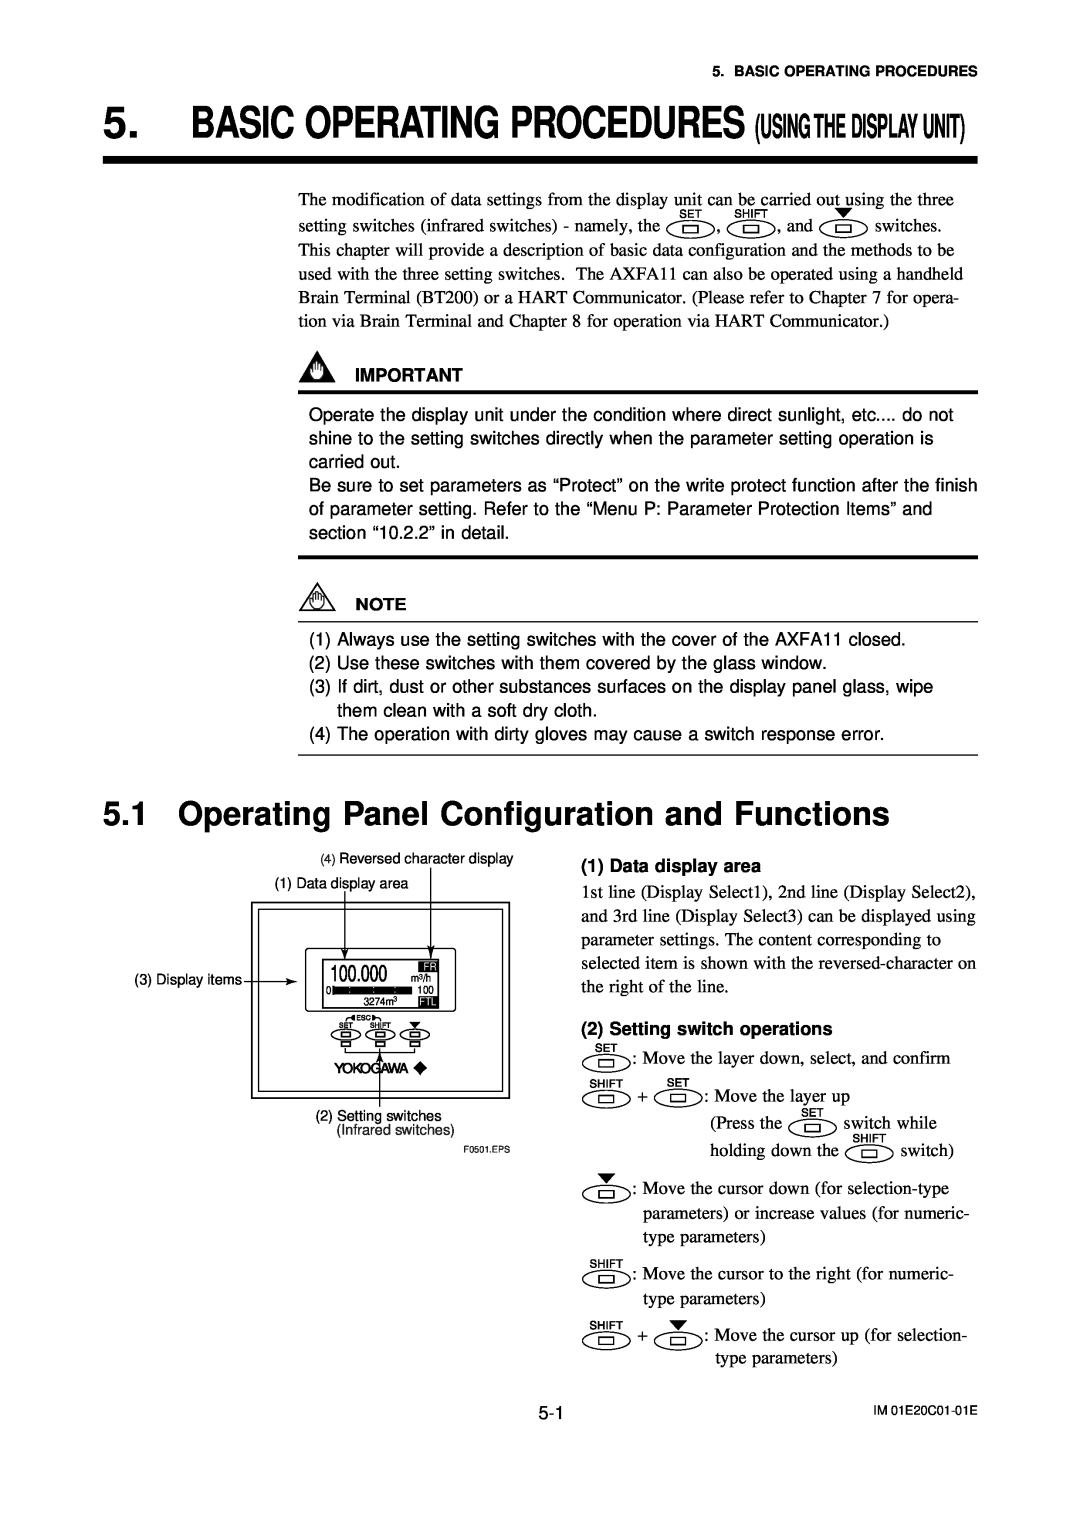 APC AXFA11G user manual Operating Panel Configuration and Functions, Data display area, Setting switch operations 